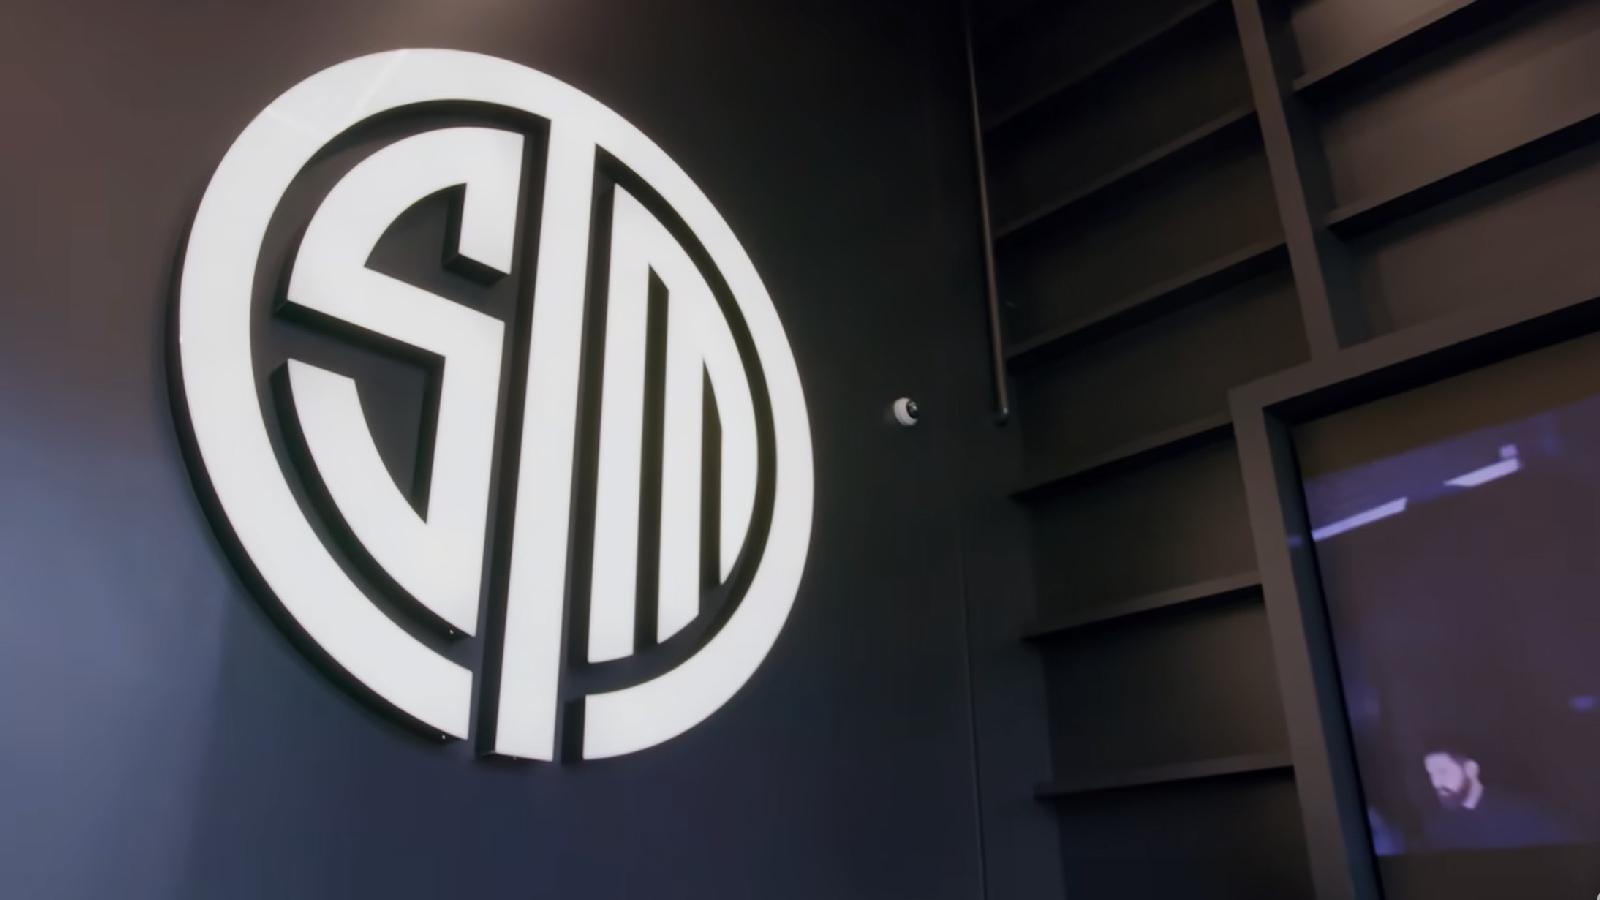 TSM logo that appears on their Valorant Challengers team's jersey